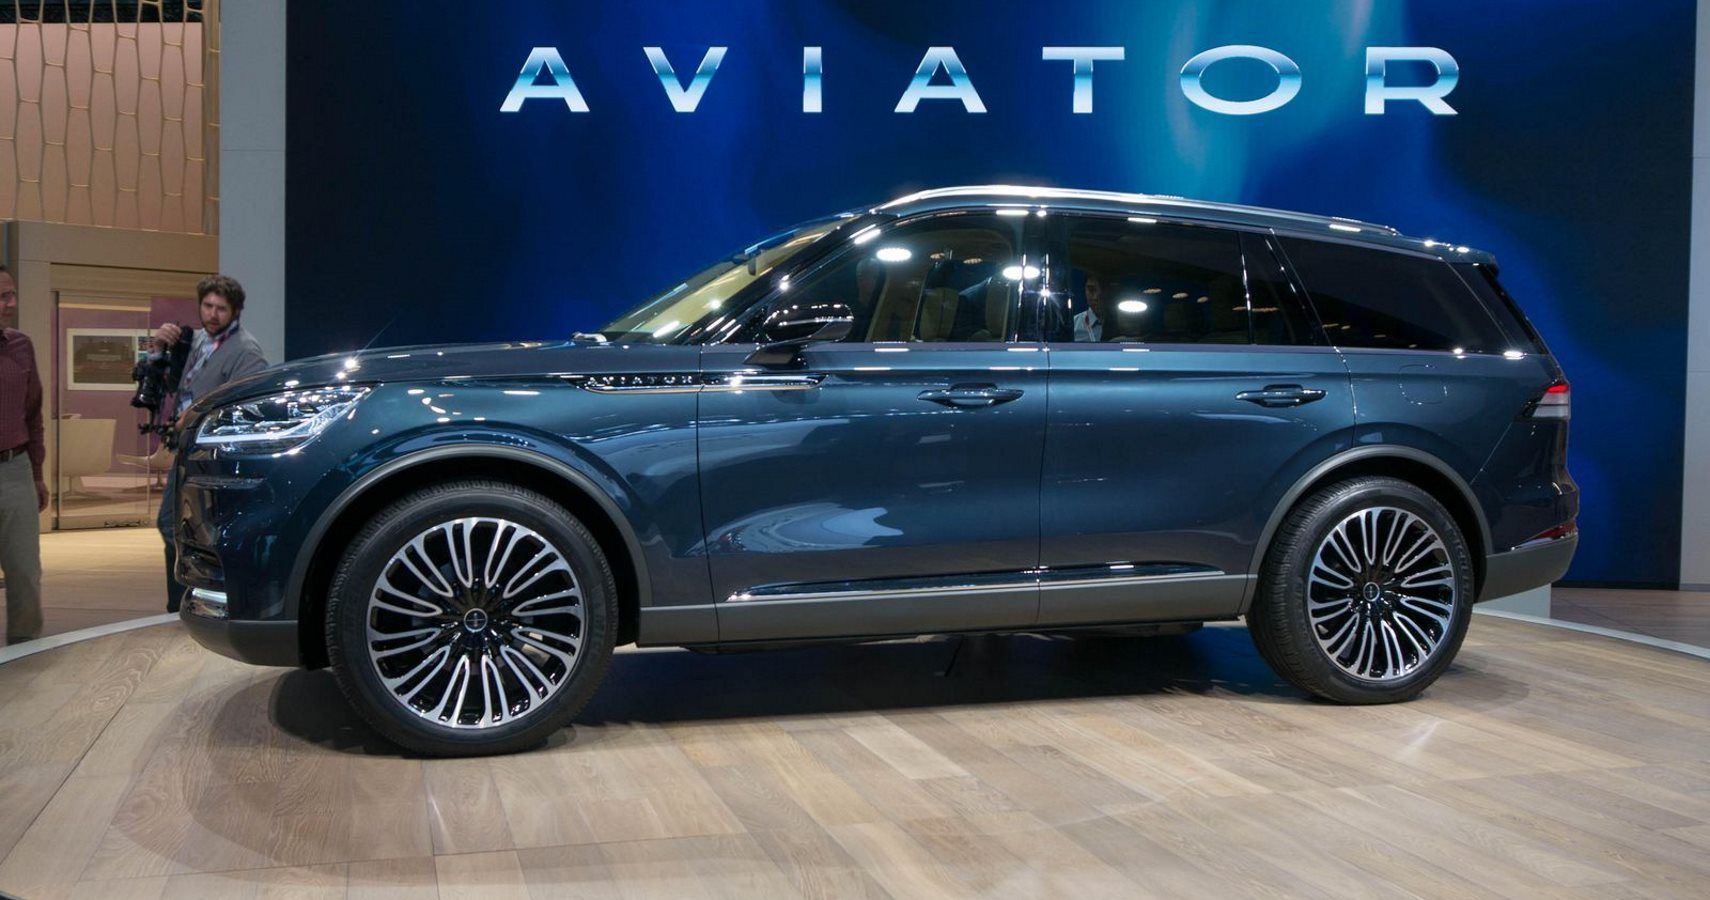 Orchestra Plays Lincoln Aviator Warning Sounds